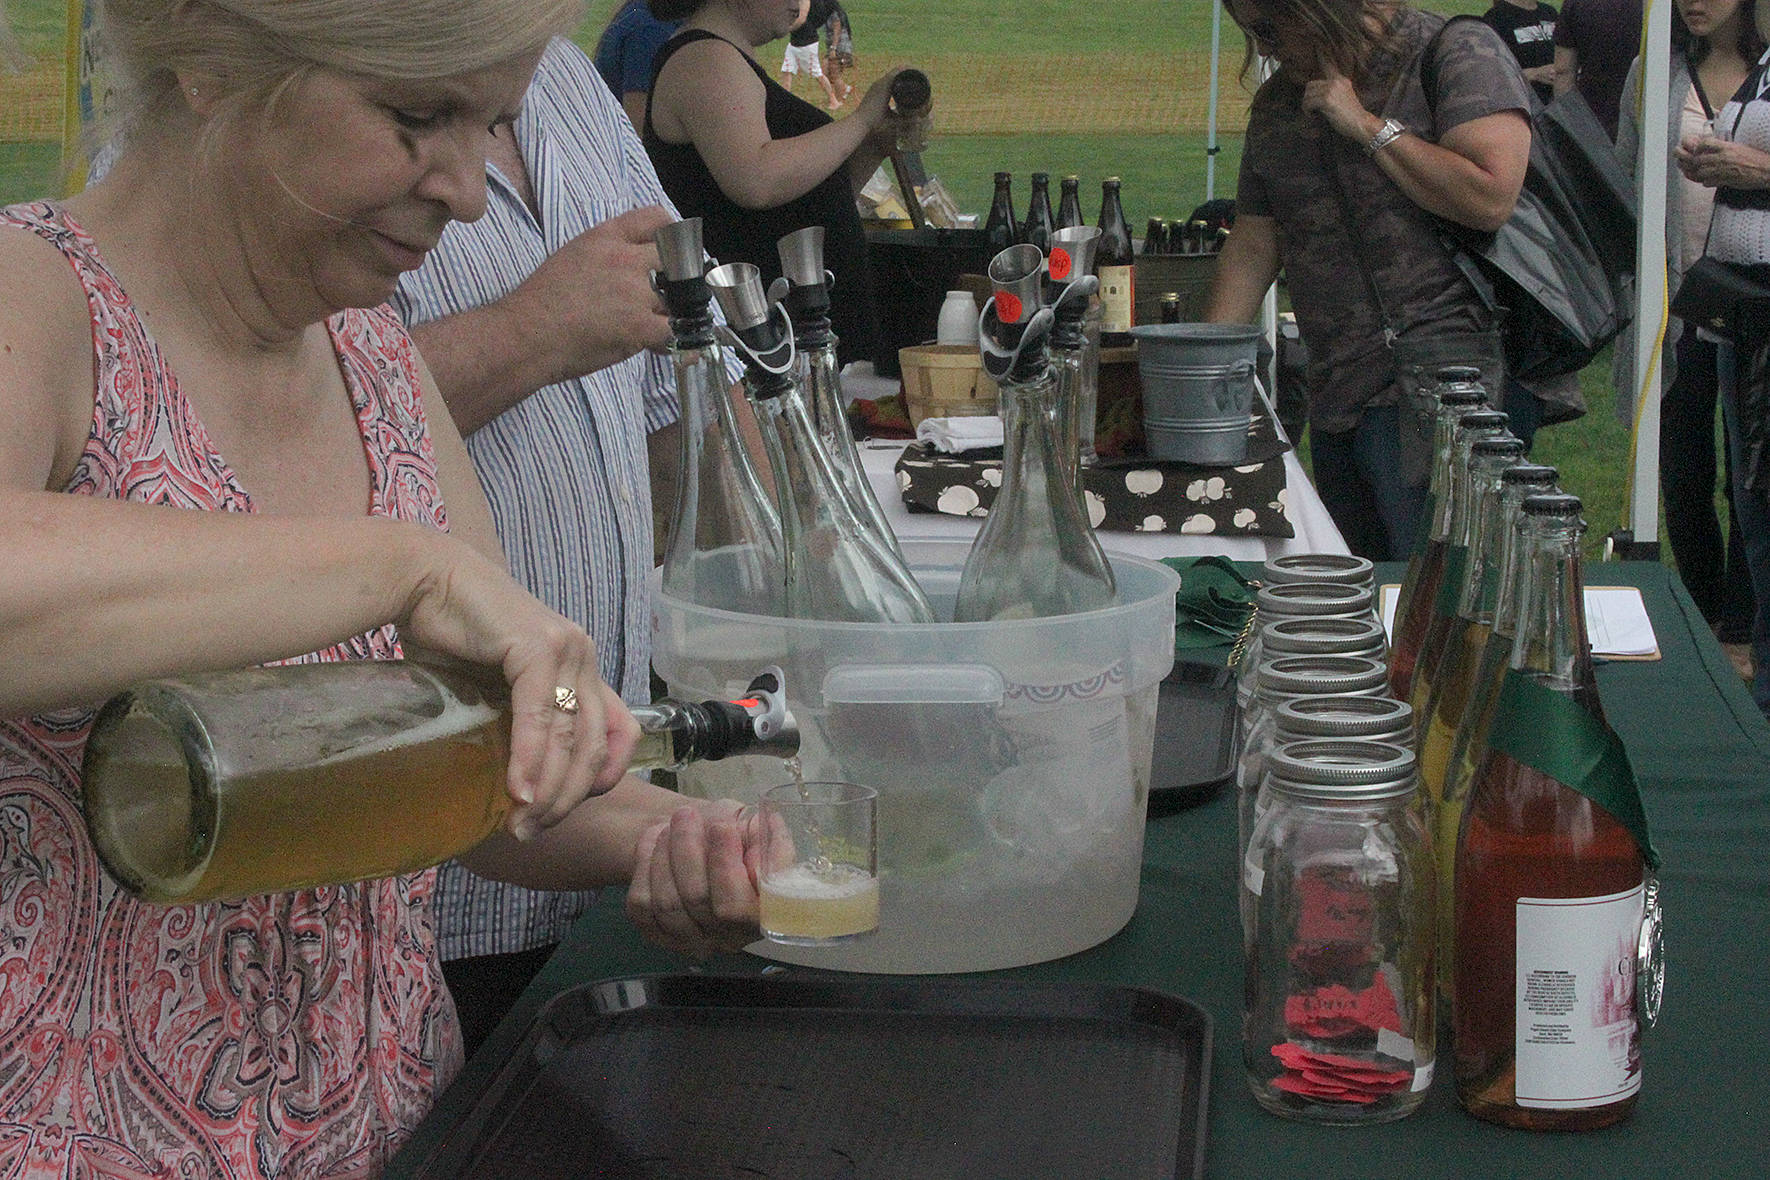 The cider poured into multiple sample cups while local brewers gave away tastes at the 2019 Sausage and Cider Fest.